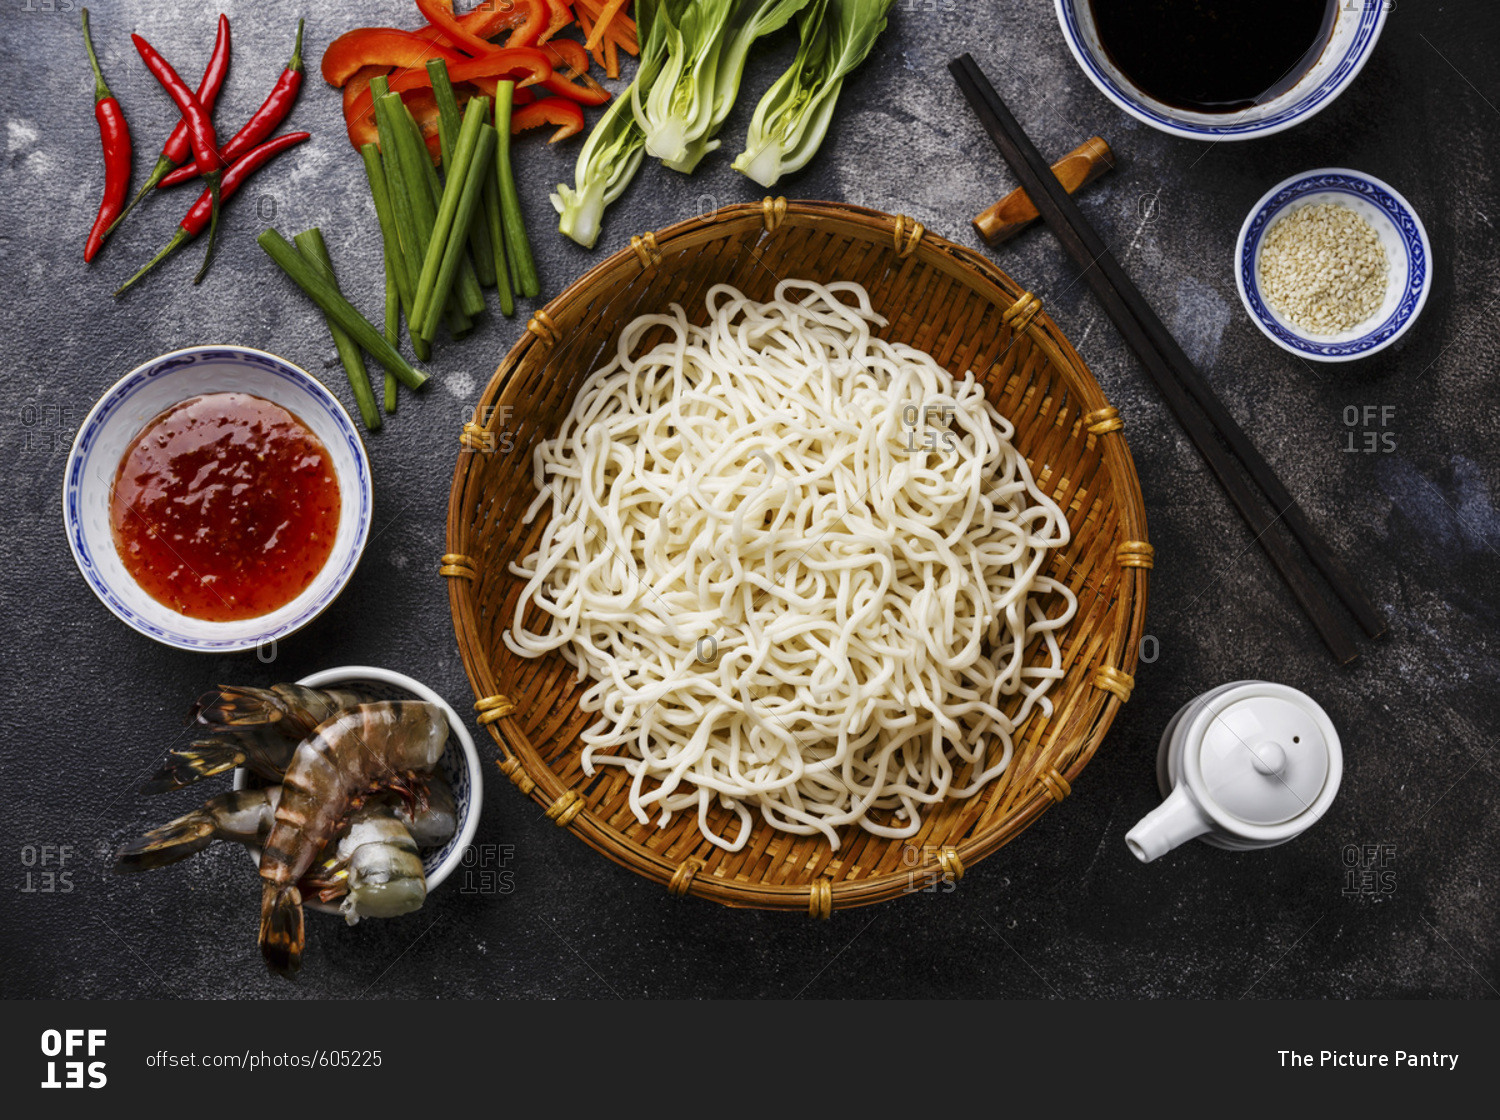 Raw Udon noodles in bamboo basket and Ingredients for cooking asian food with Tiger shrimps, greens, vegetables, spices on dark background